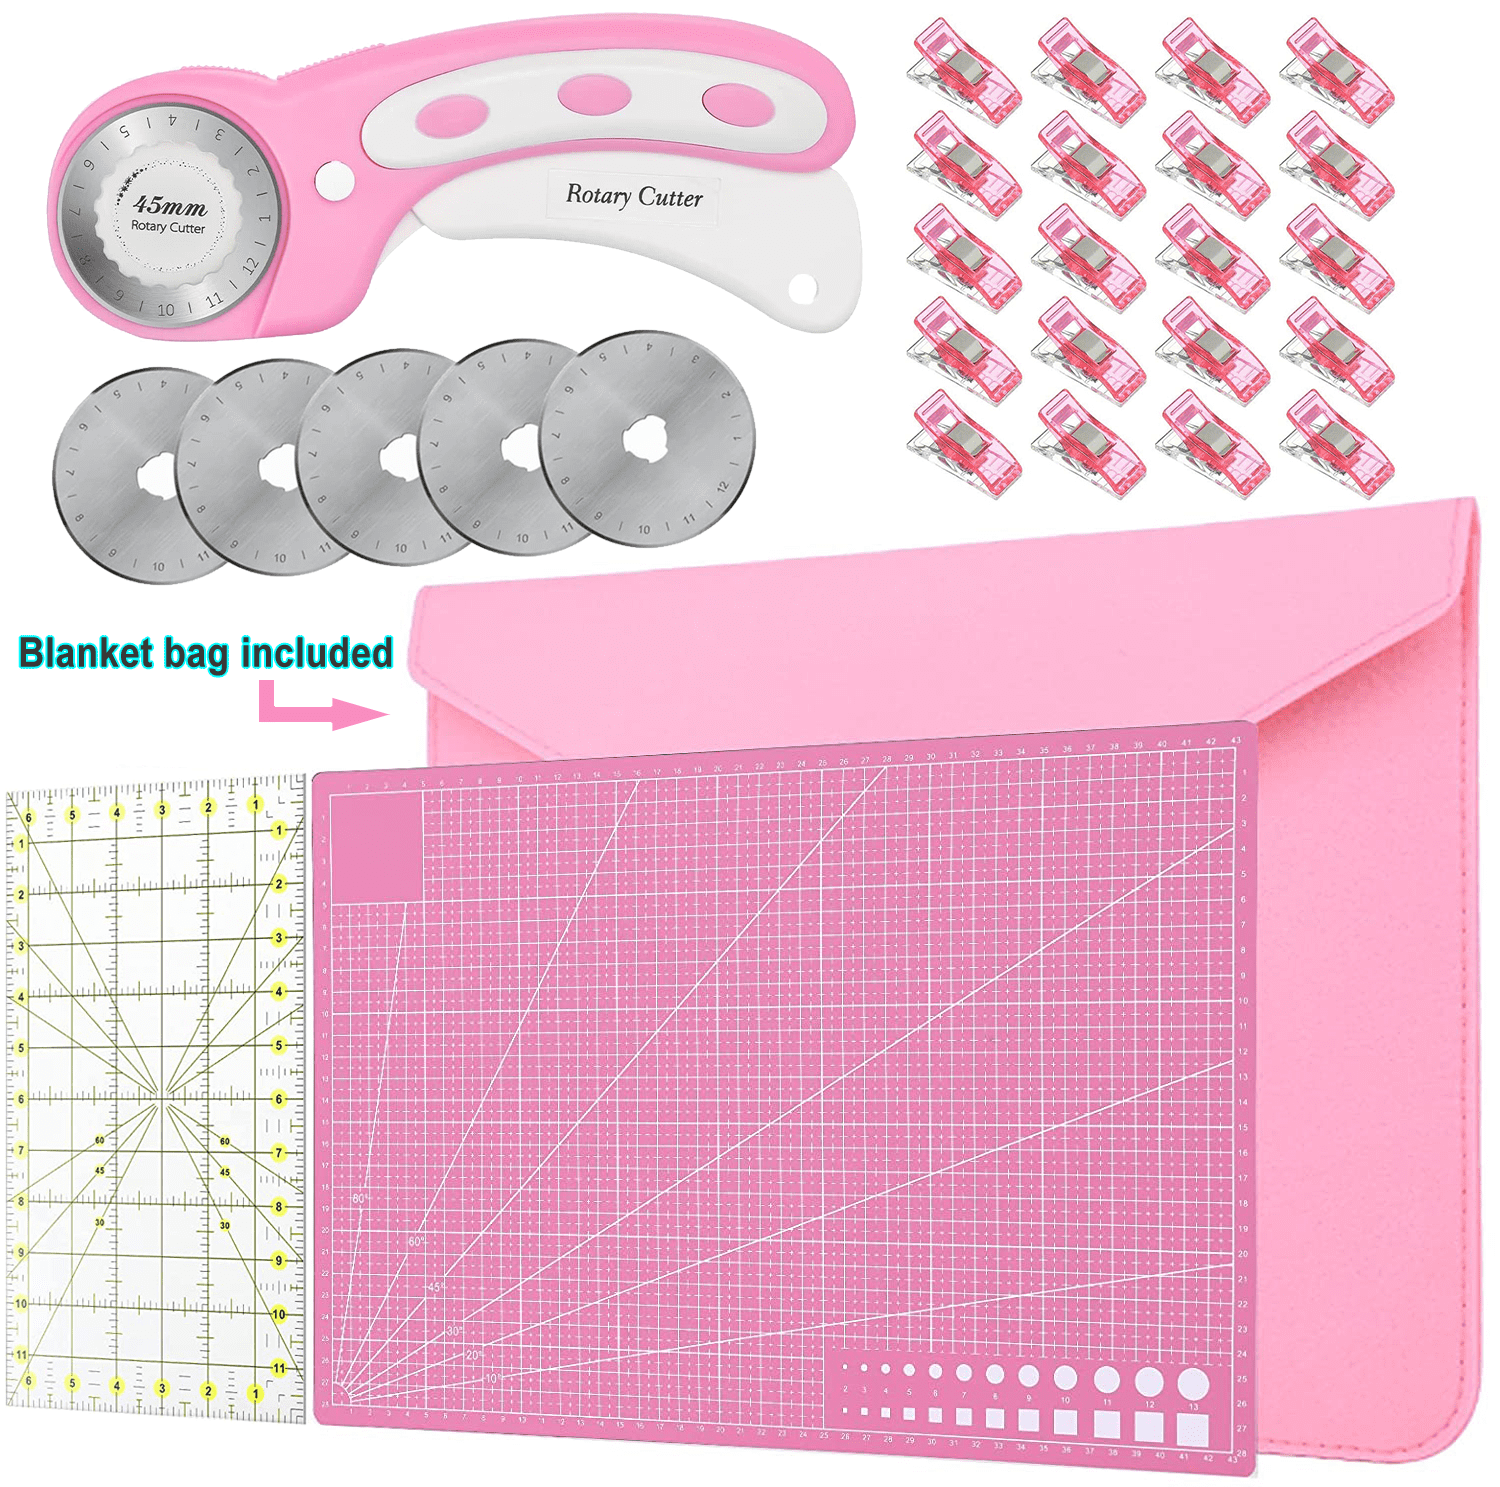 Rotary Cutter Acrylic Ruler 20 Pieces of Sewing Clips for Fabric Quilting Crafting Patch Working Sewing Accessories and Supplies Set with 5 X 45mm Replacement Blades A3 Cutting Mat 